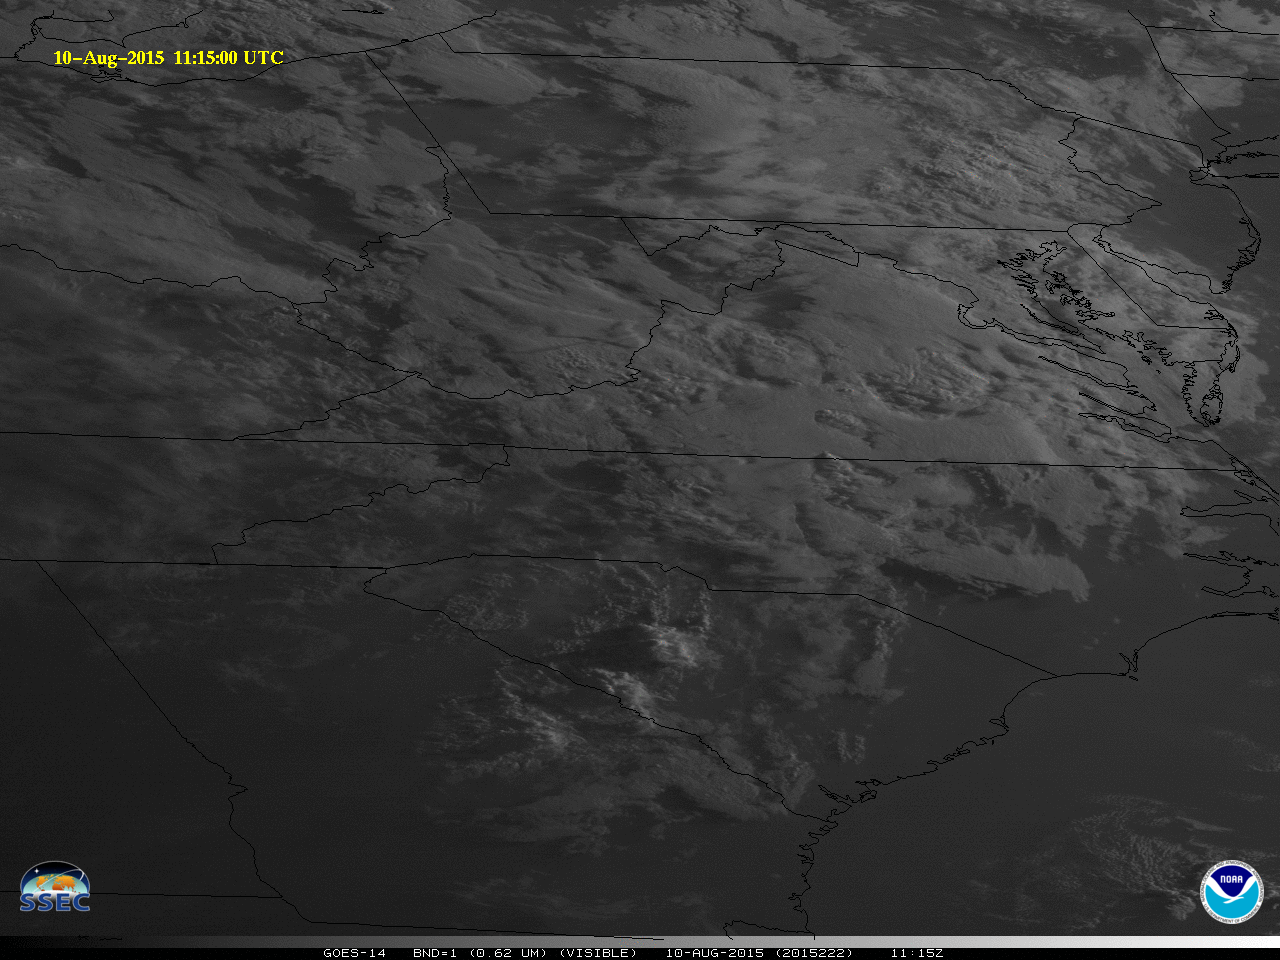 GOES-14 Visible (0.62 µm) Imagery  [click to play animation]